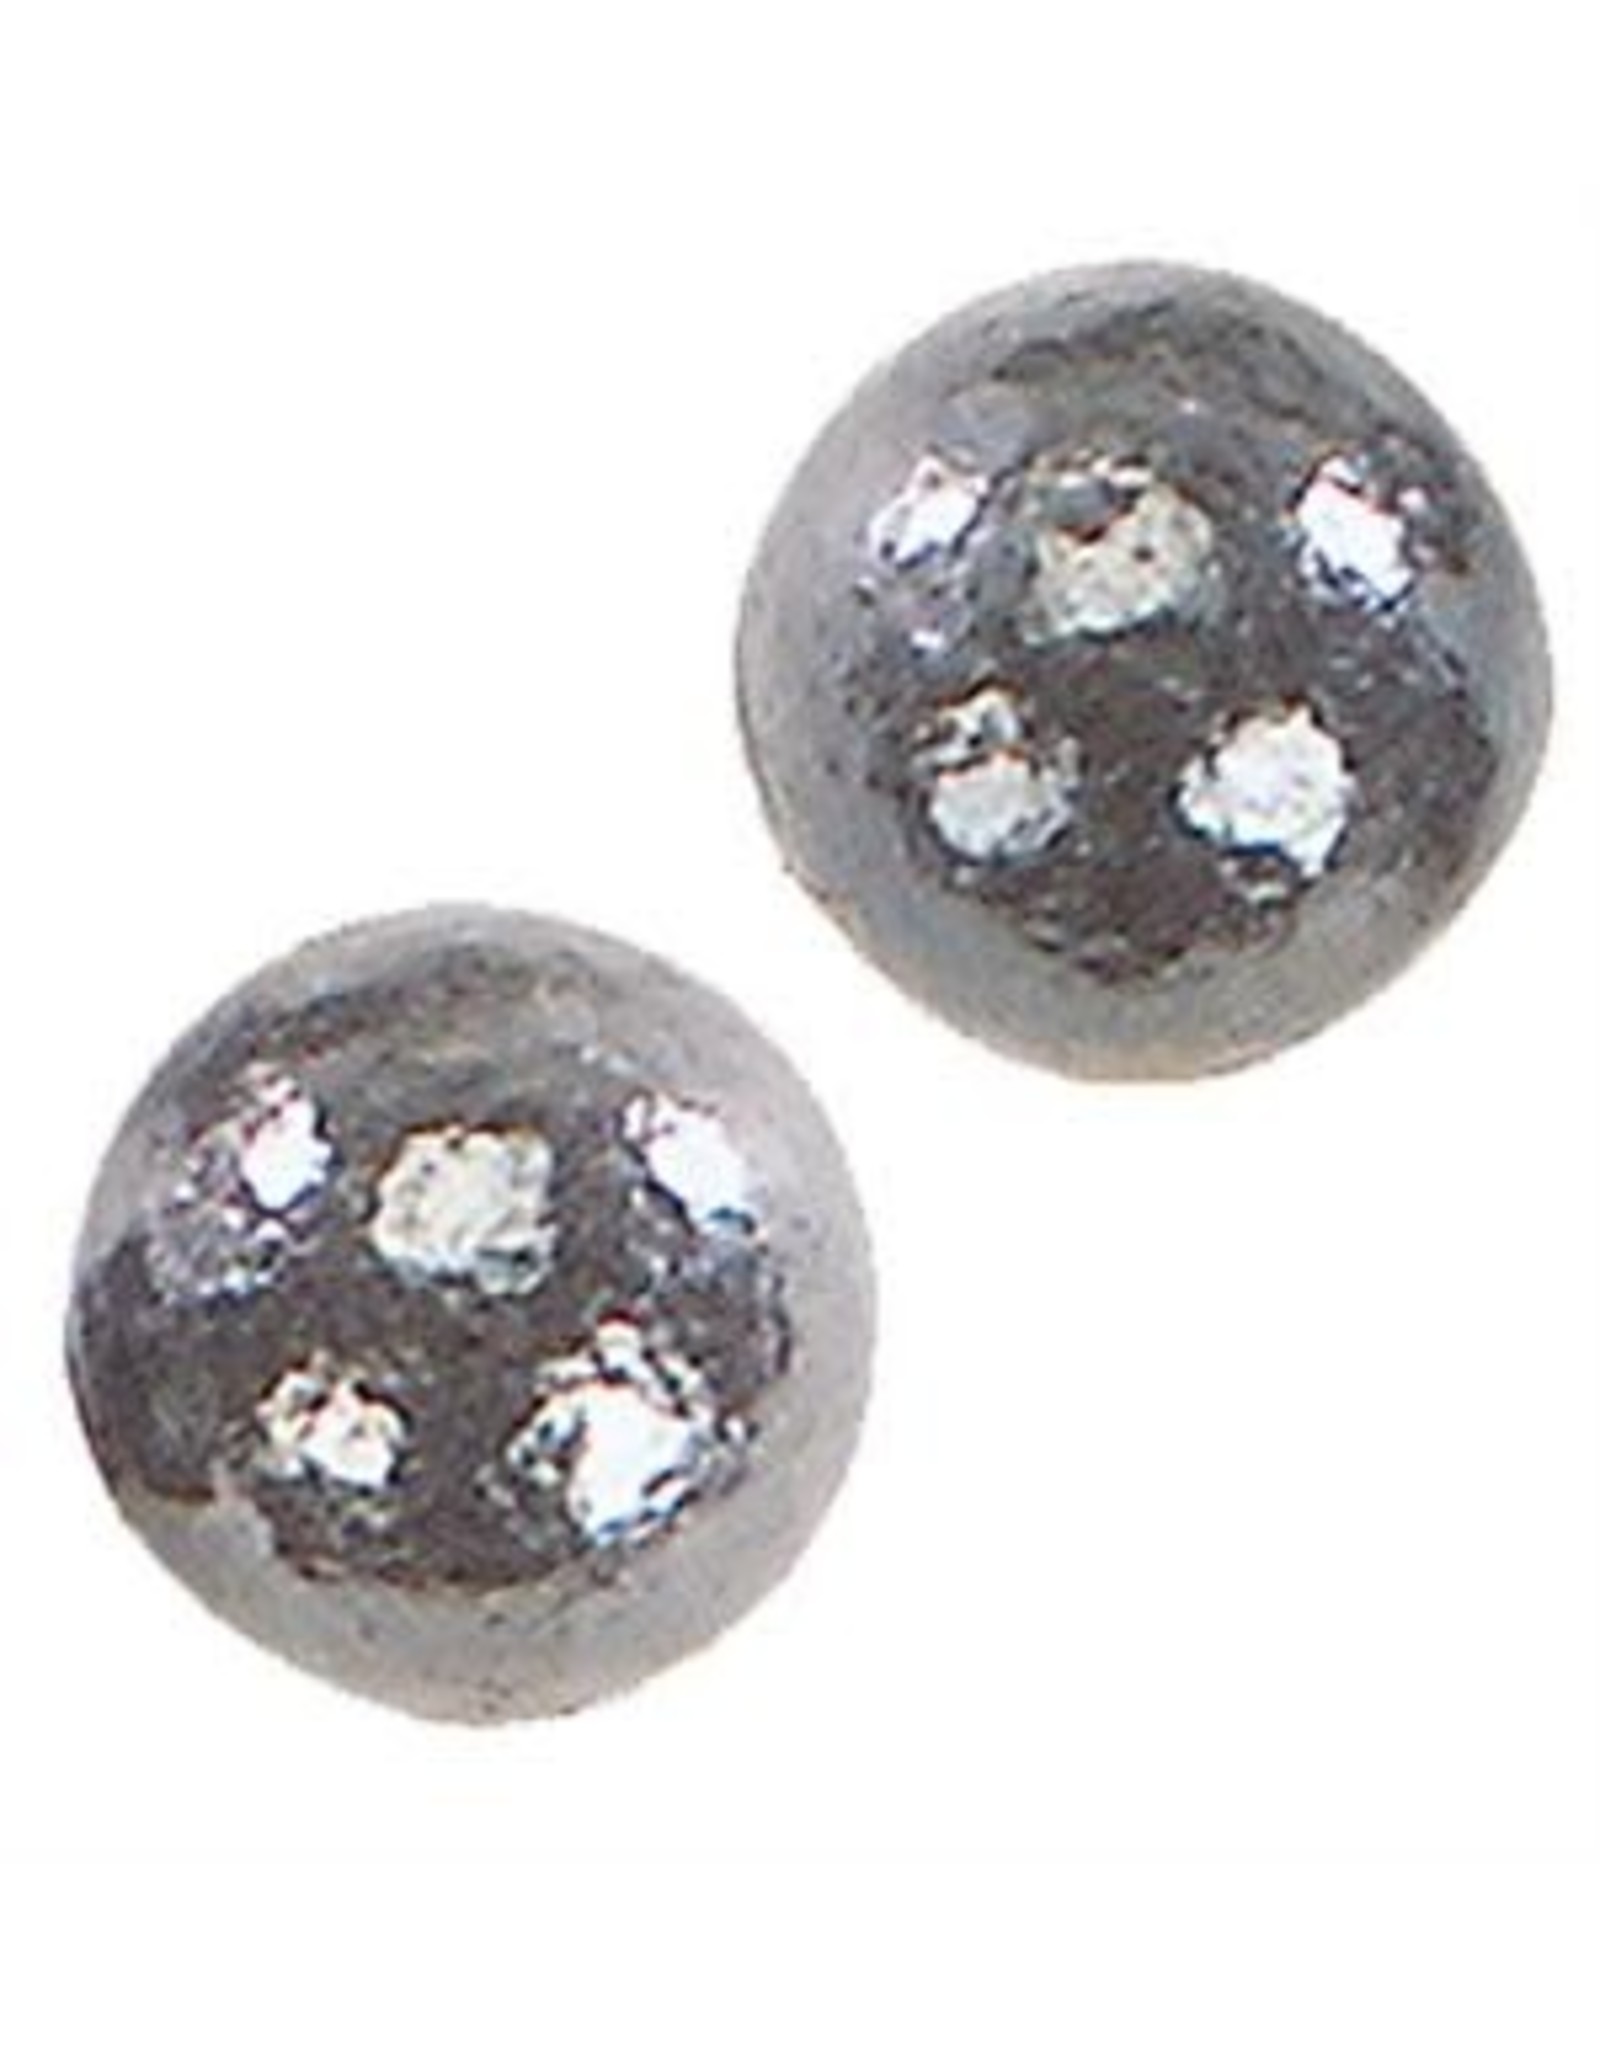 Traditions Rifle Round Balls .50 Cal / .490 Diam - 100 Count